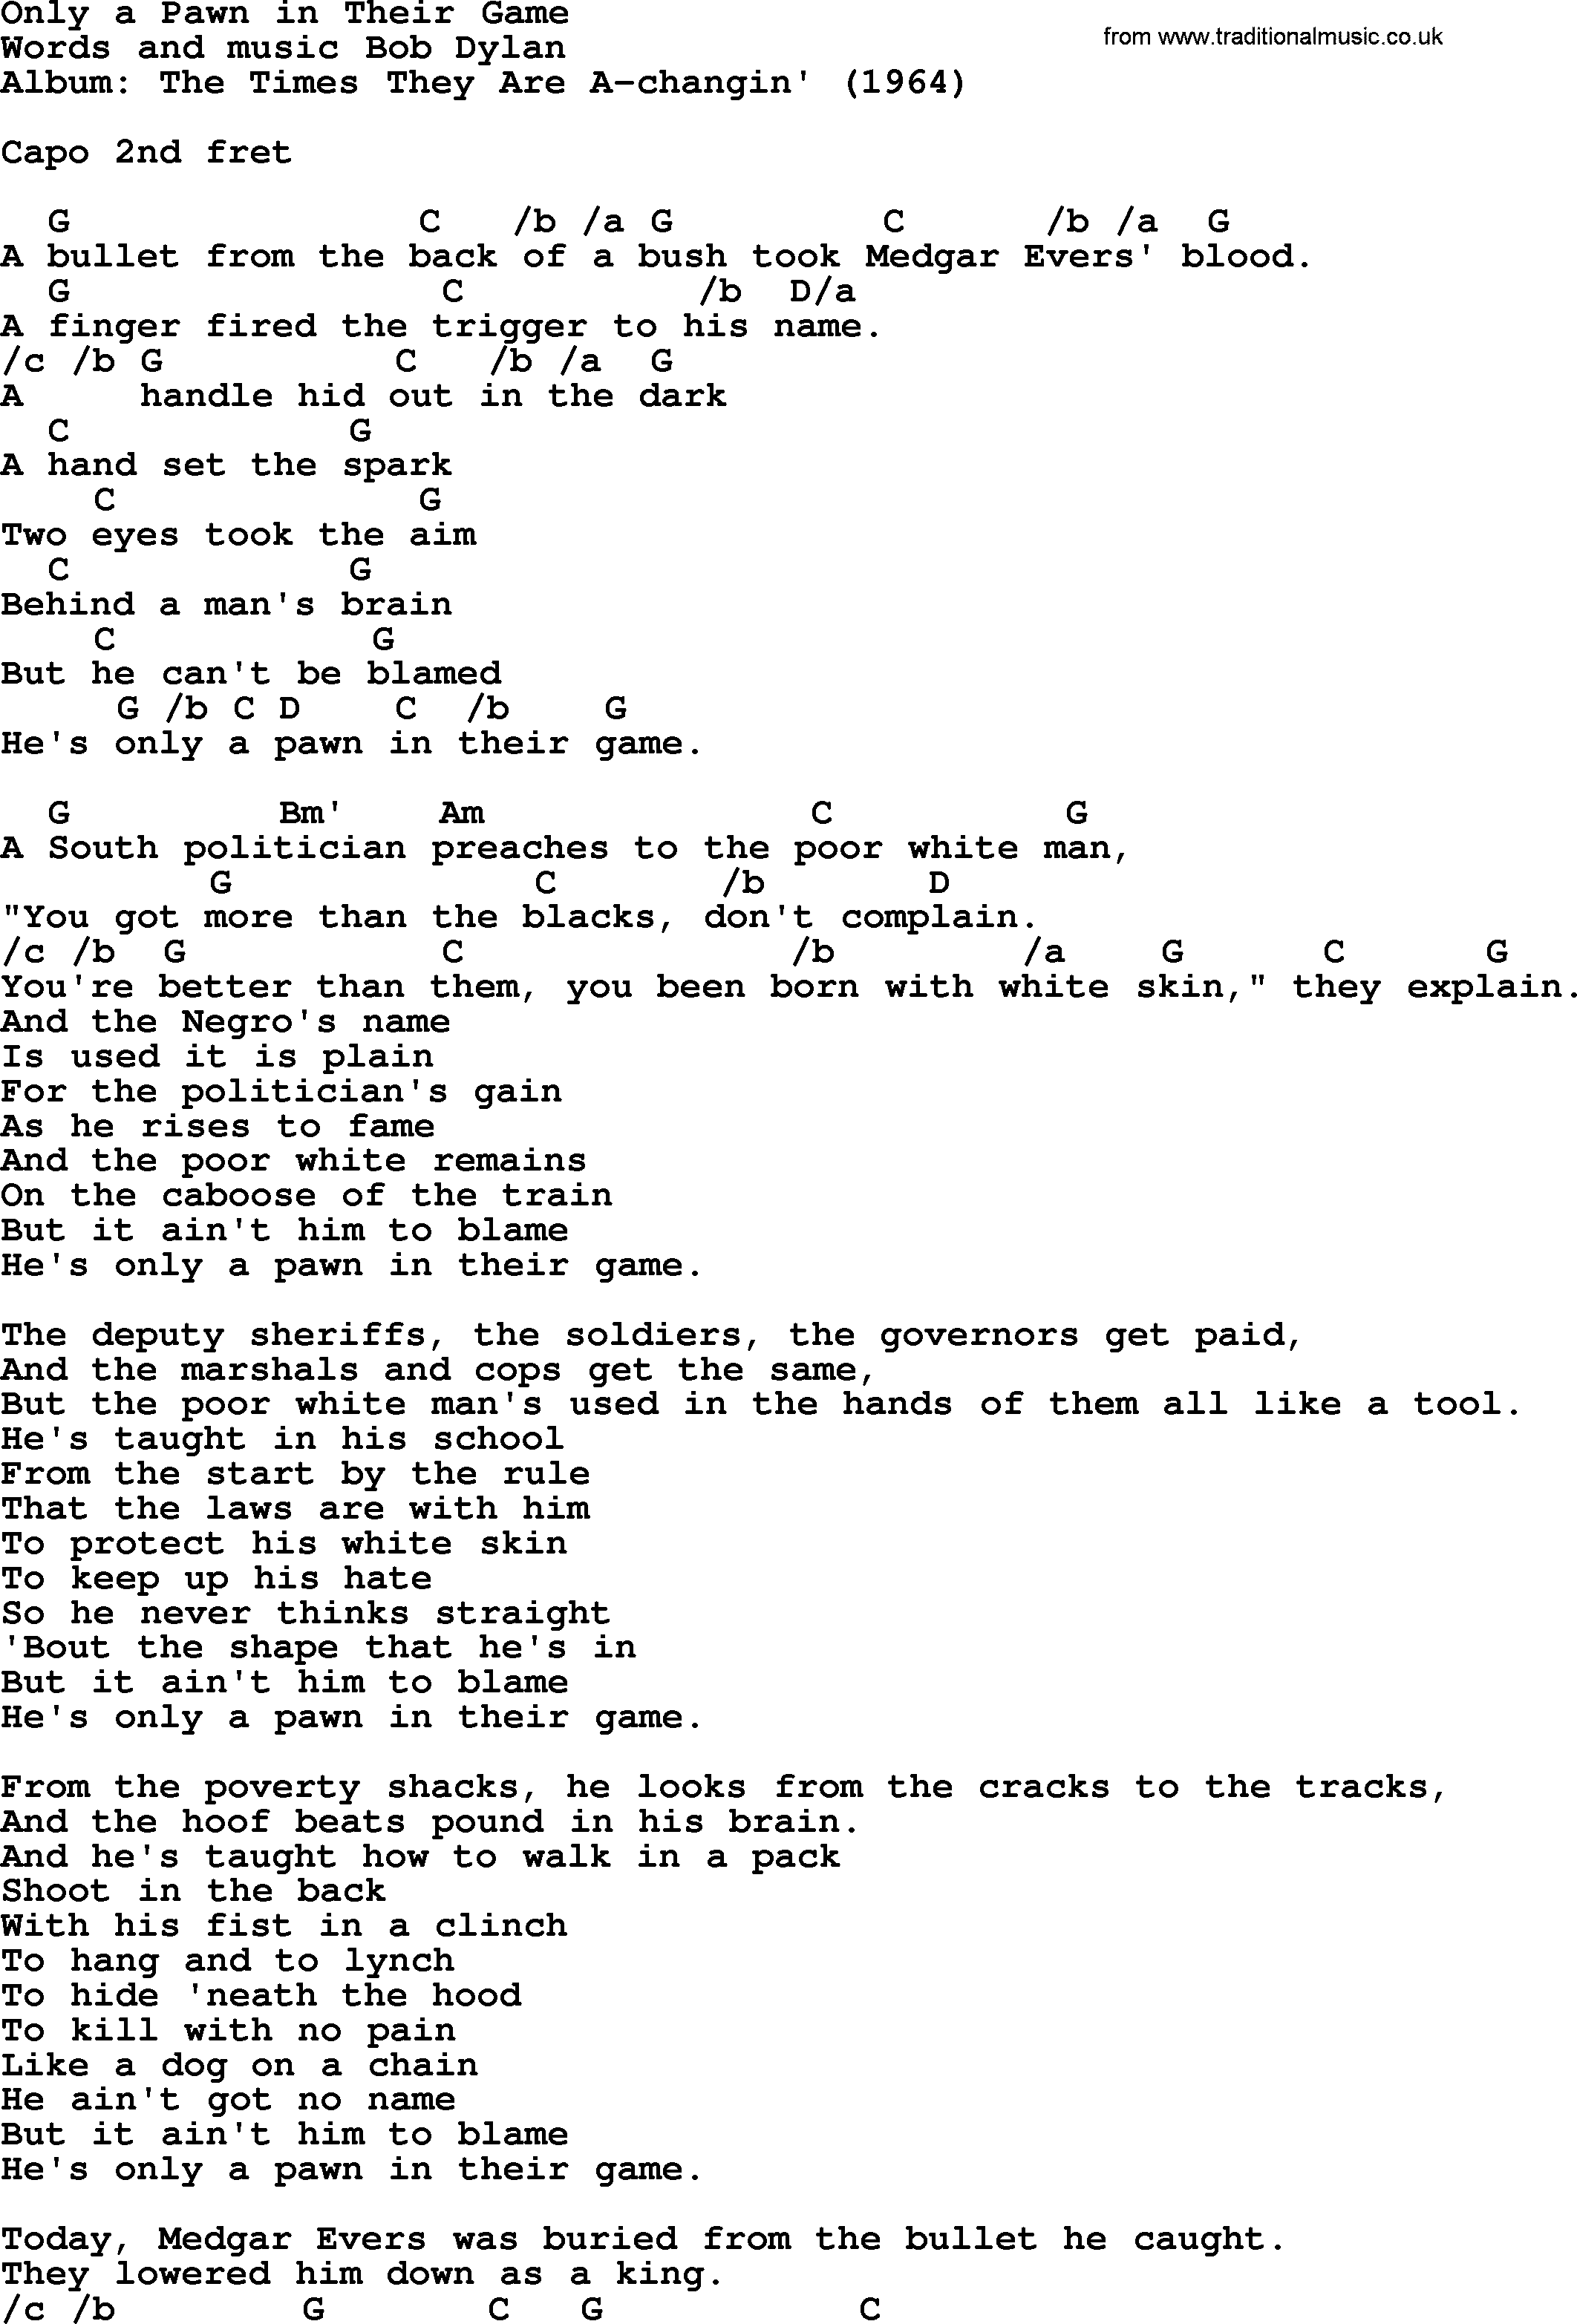 Bob Dylan song, lyrics with chords - Only a Pawn in Their Game